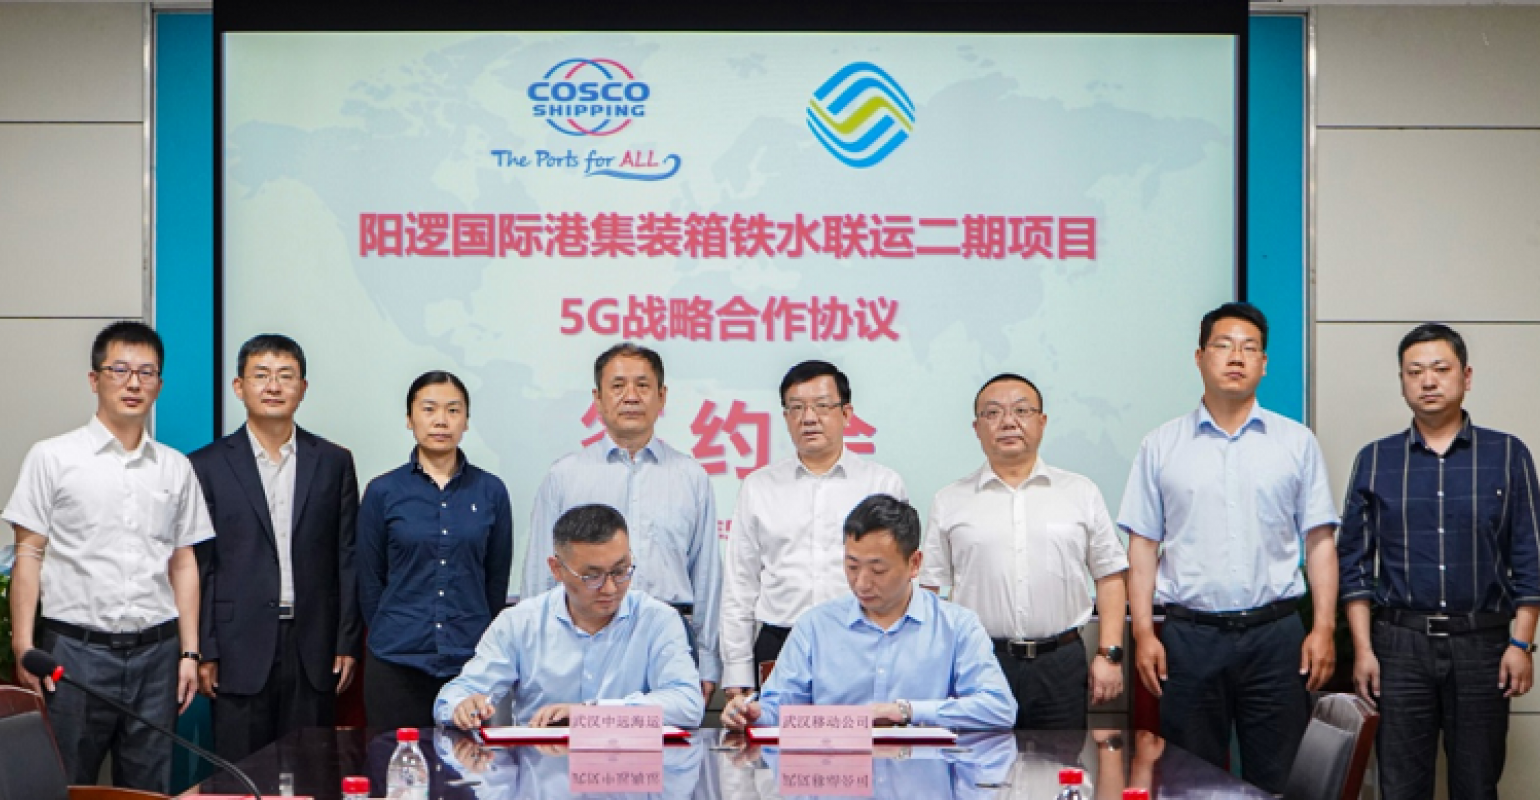 Cosco Shipping and China Mobile ink 5G agreement for Wuhan’s Yangluo port(图1)